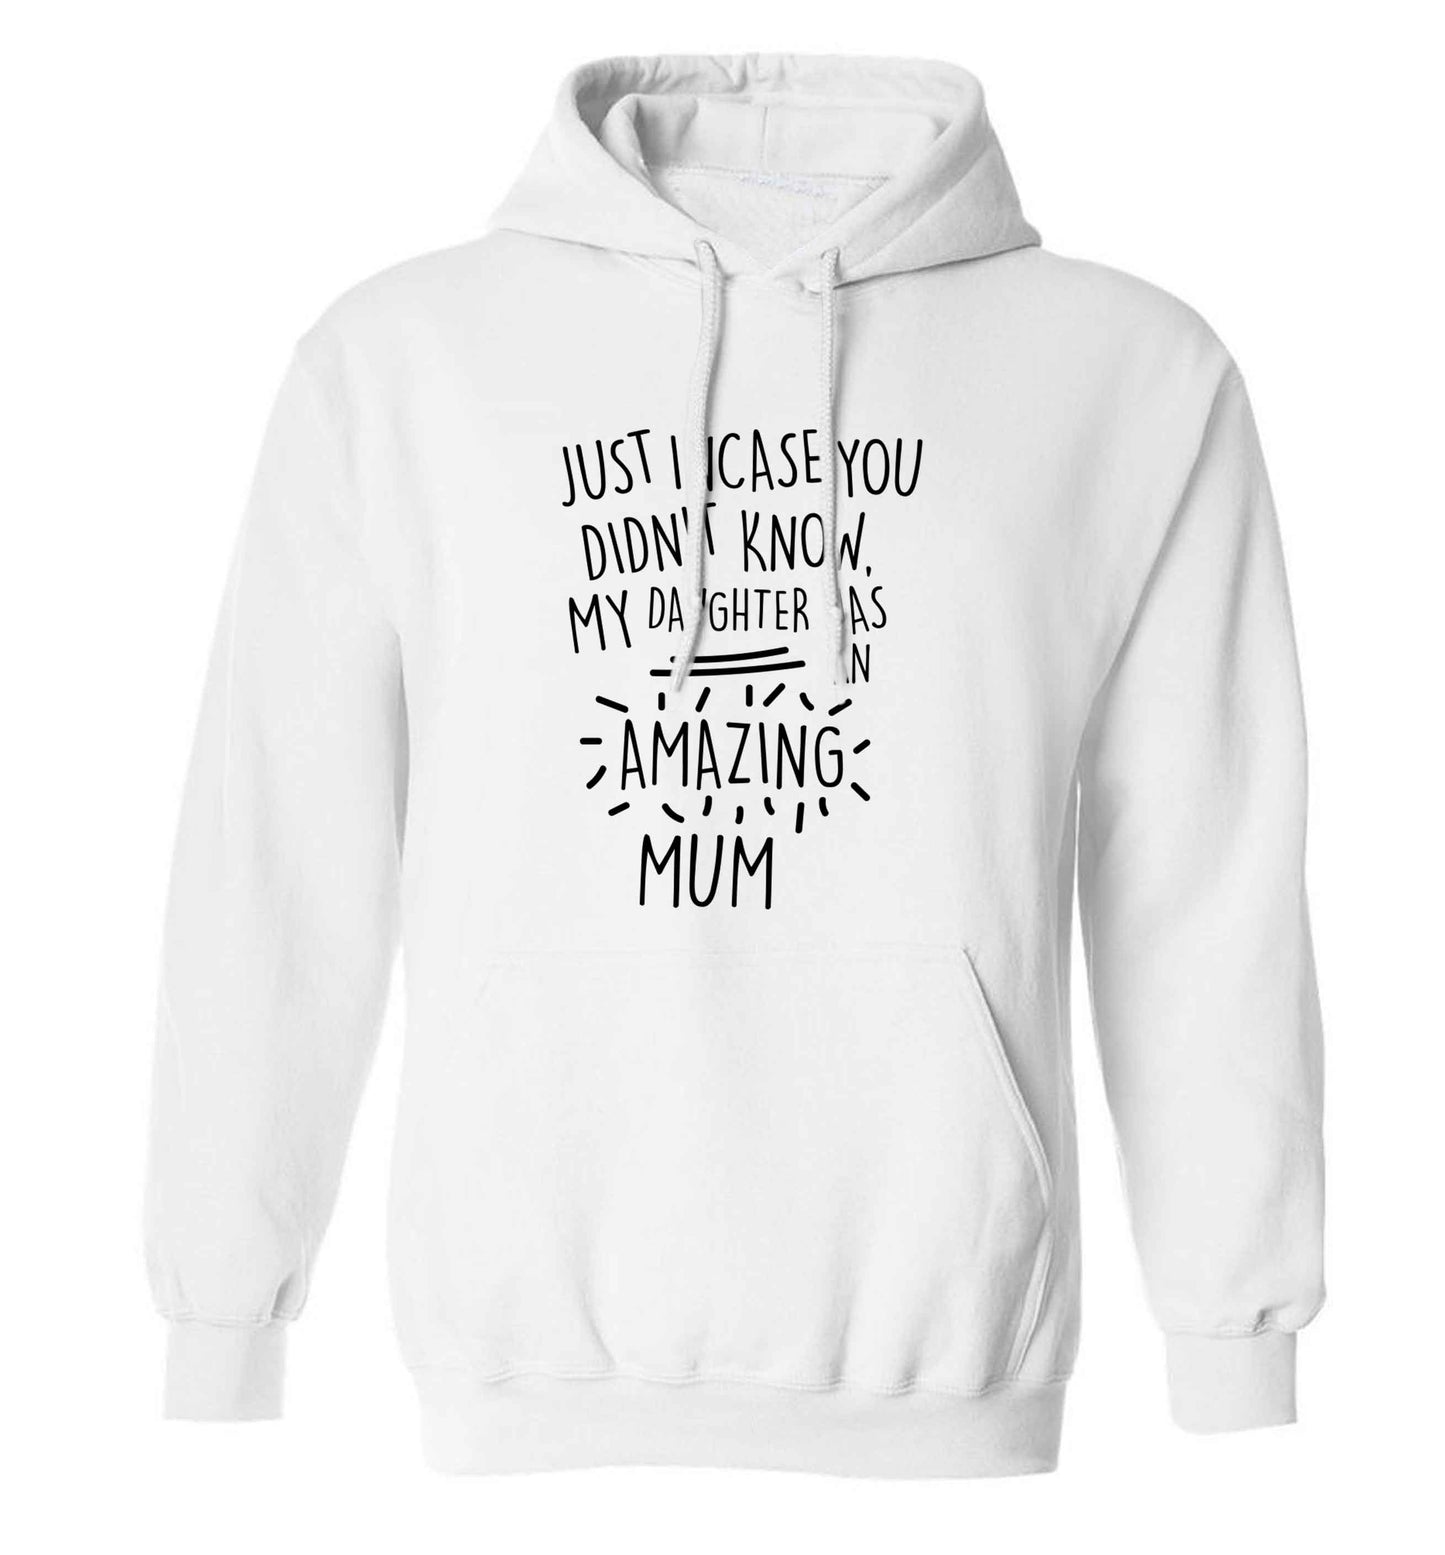 Just incase you didn't know my daughter has an amazing mum adults unisex white hoodie 2XL